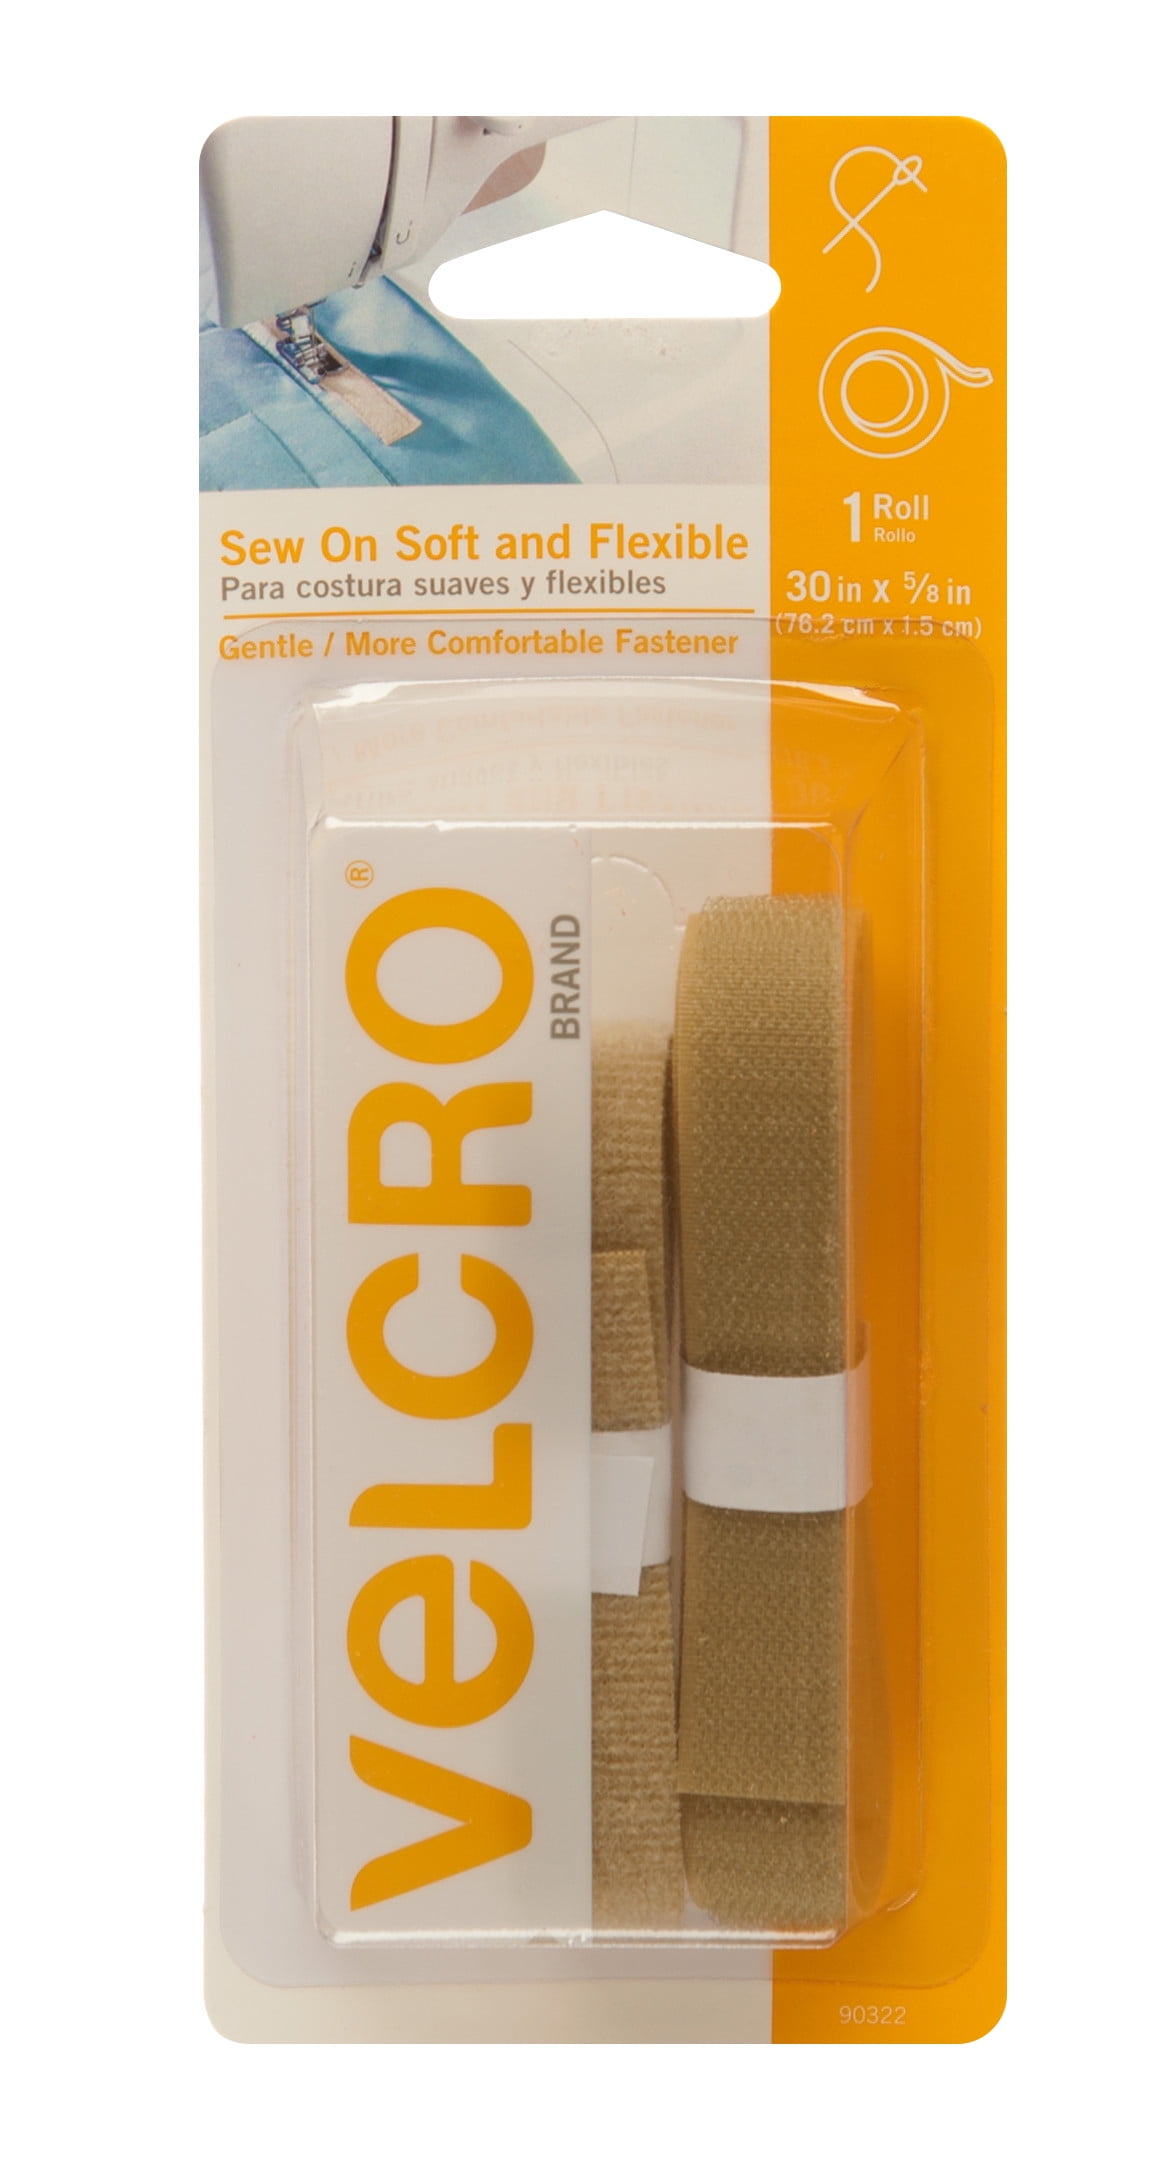 Velcro Brand Sticky Back for Fabrics 10 ft Bulk Roll No Sew Tape with Adhesive Cut Strips to Length Permanent Bond to Clothing for Hemming Replace